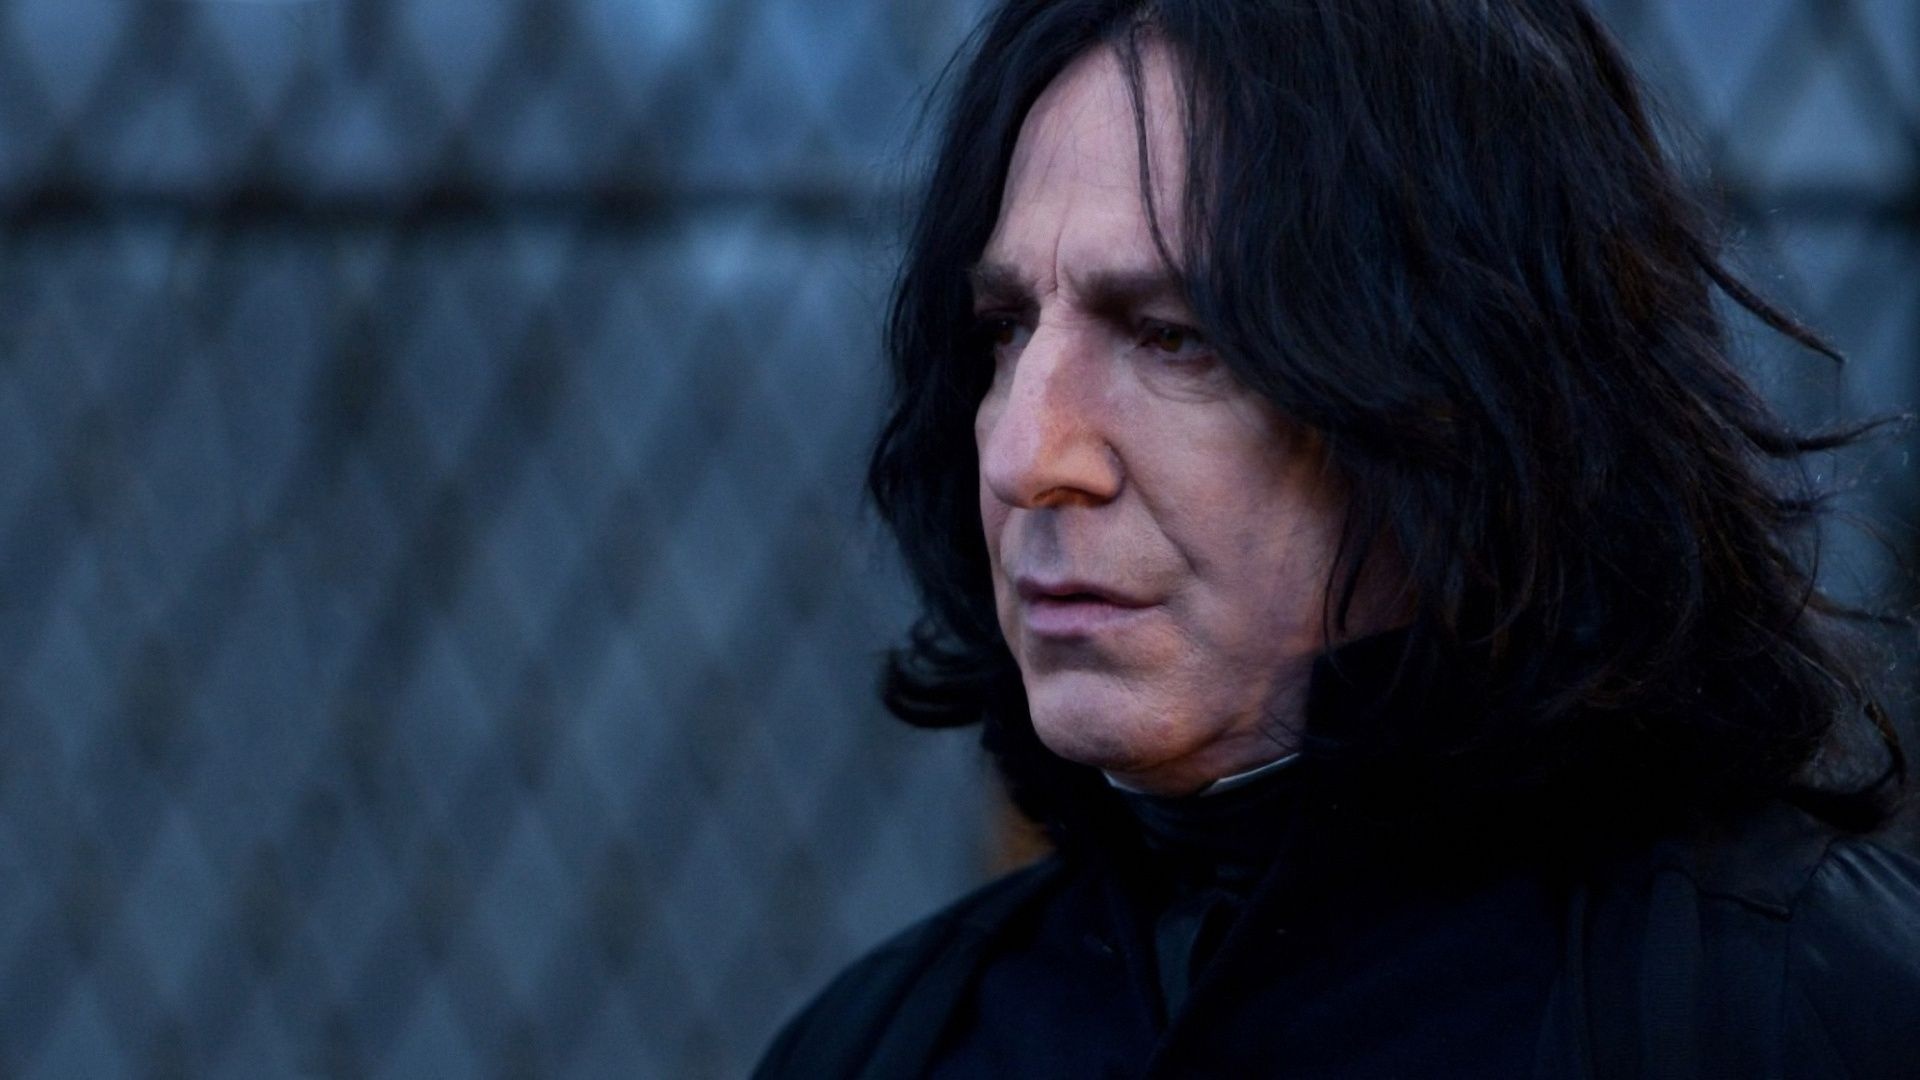 Severus Snape: Was portrayed by actor Alan Rickman in the Harry Potter film series. 1920x1080 Full HD Background.